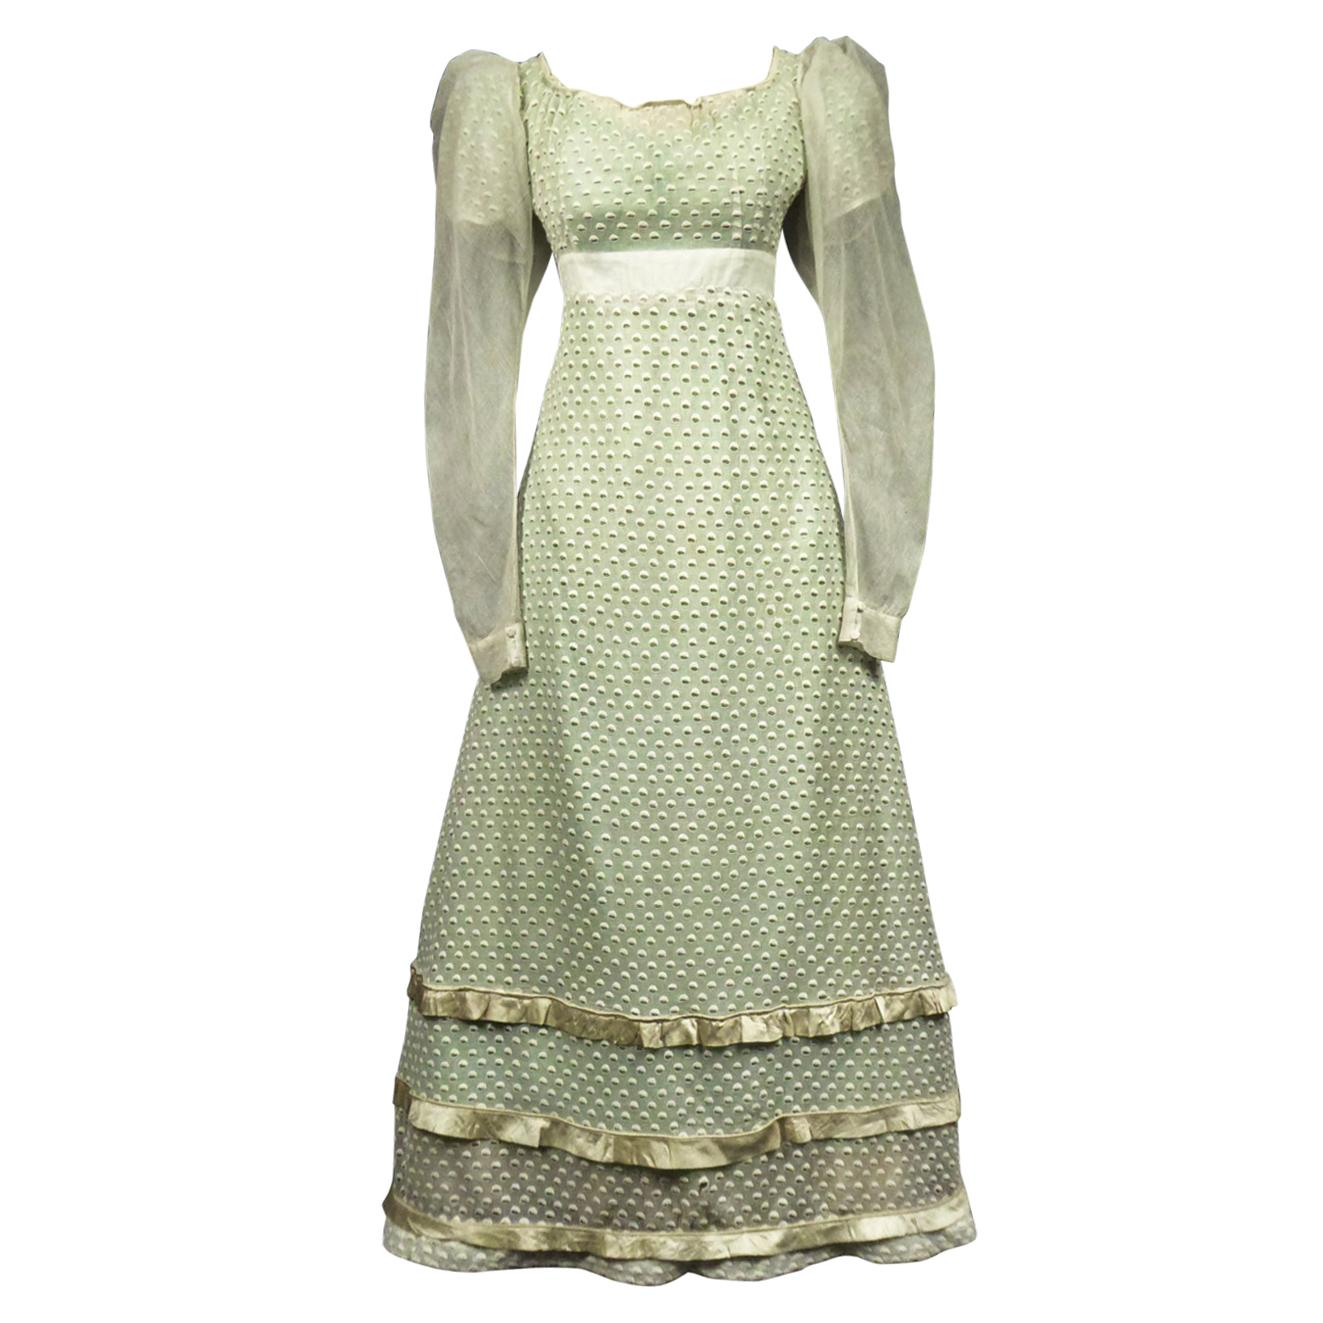 A French Early Regency White Embroidered Day Dress – Circa 1815-1820